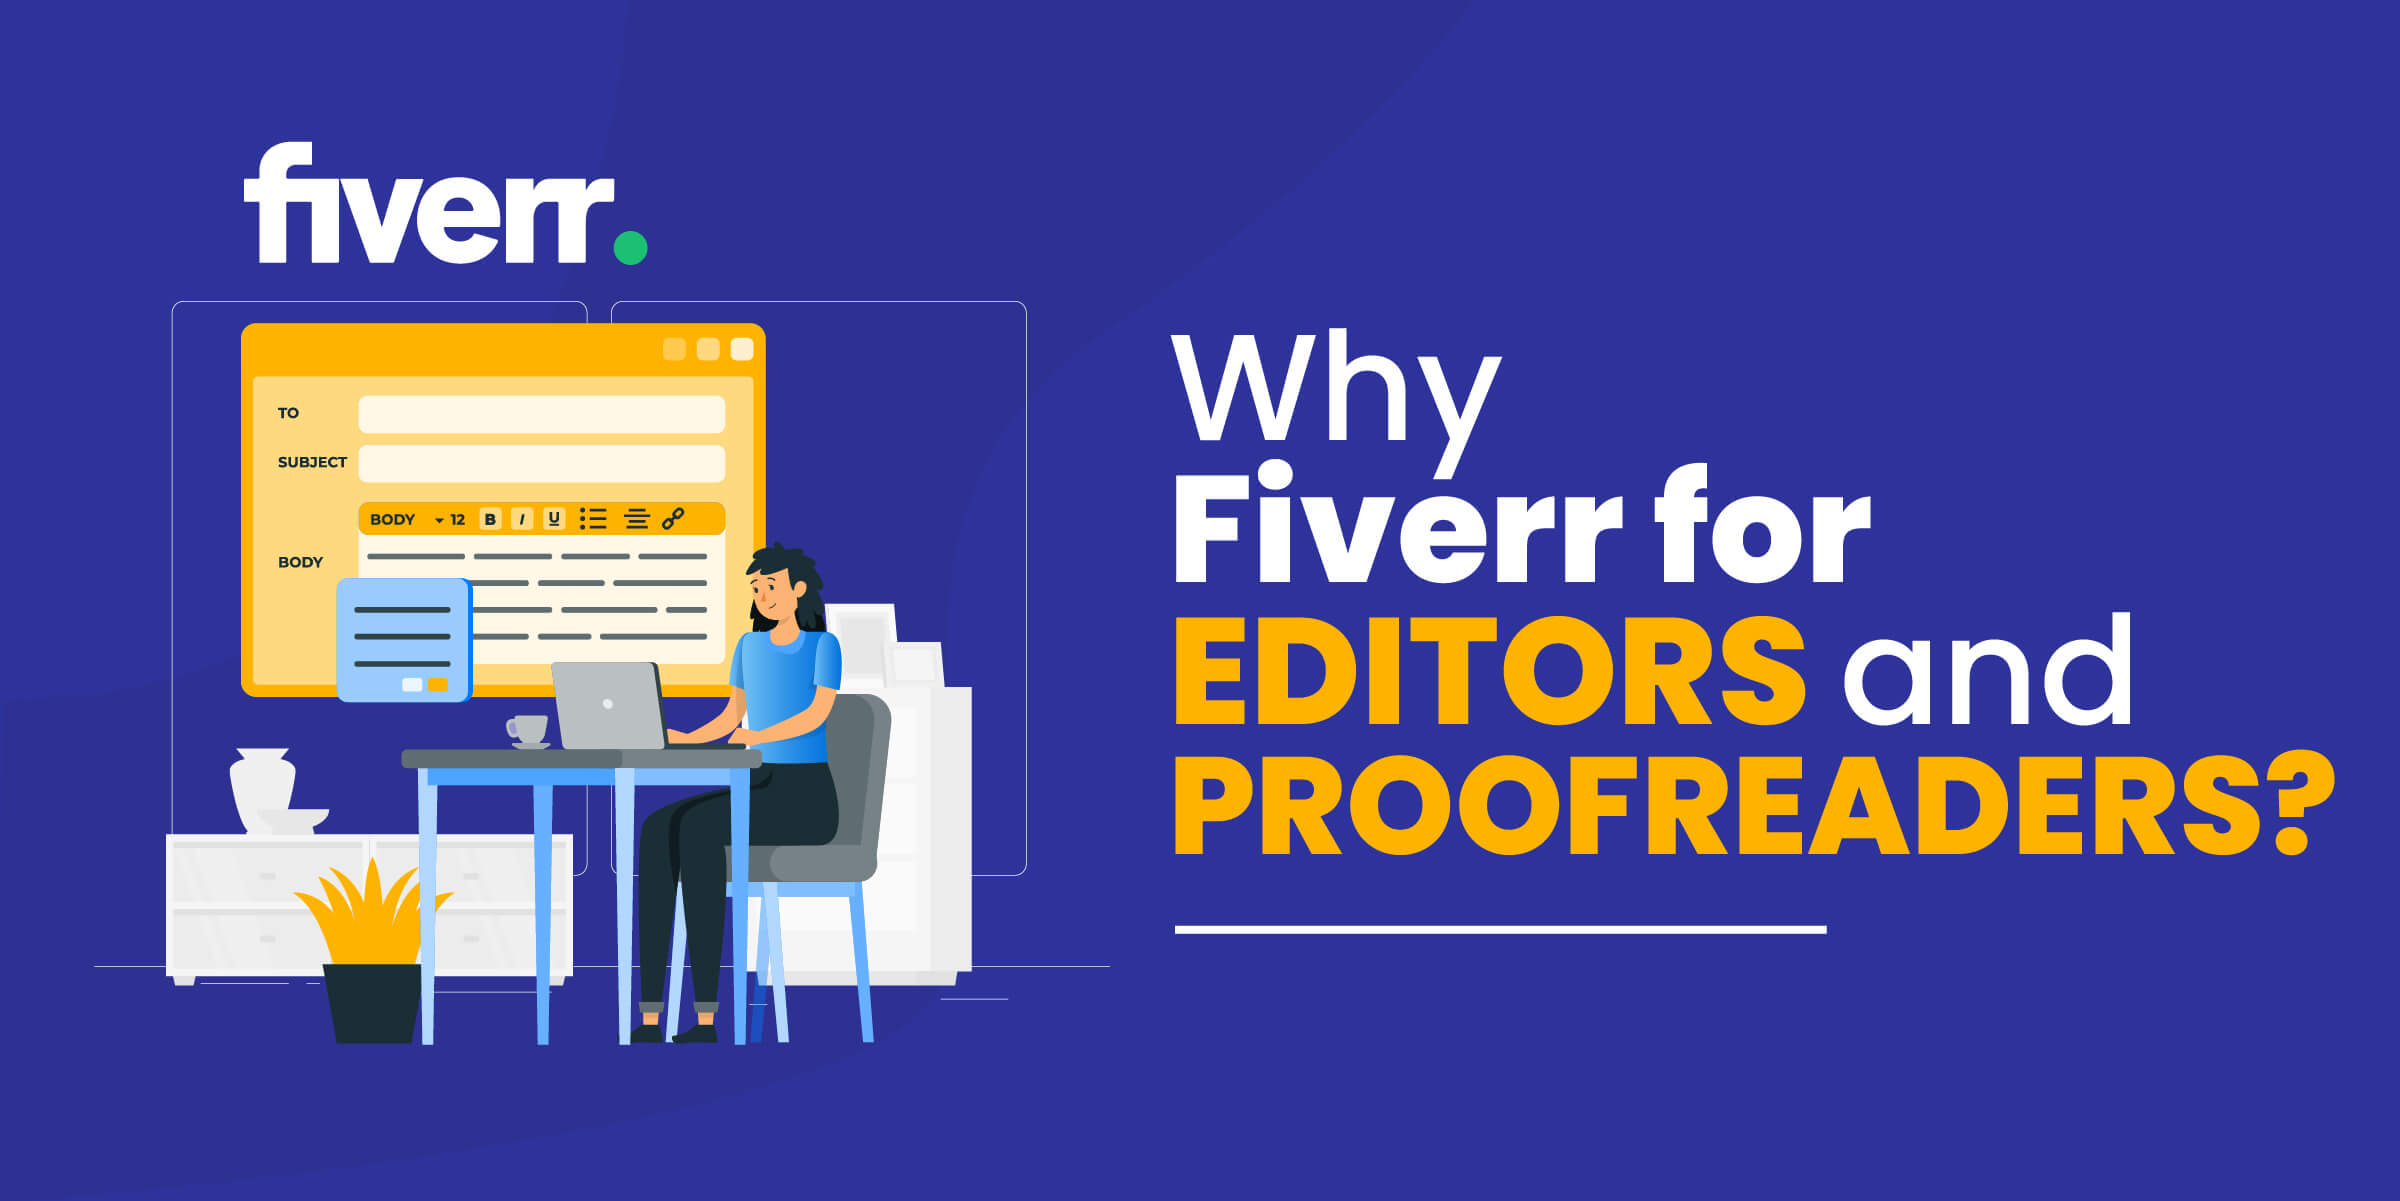 Why Fiverr for Editors